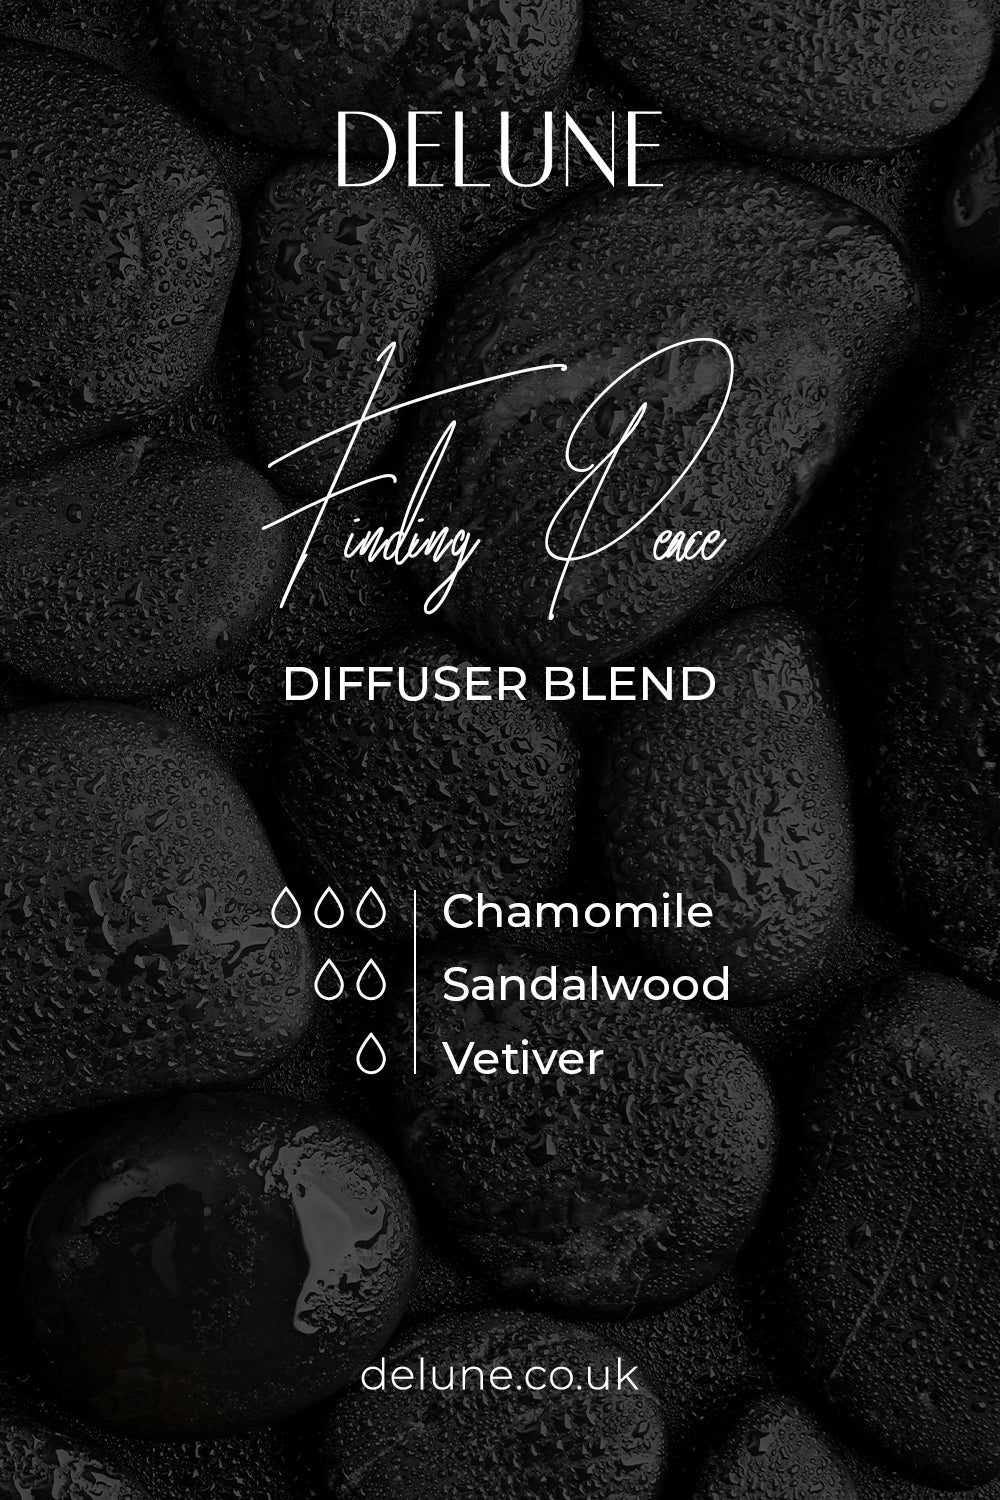 Finding Peace - Diffuser Blend